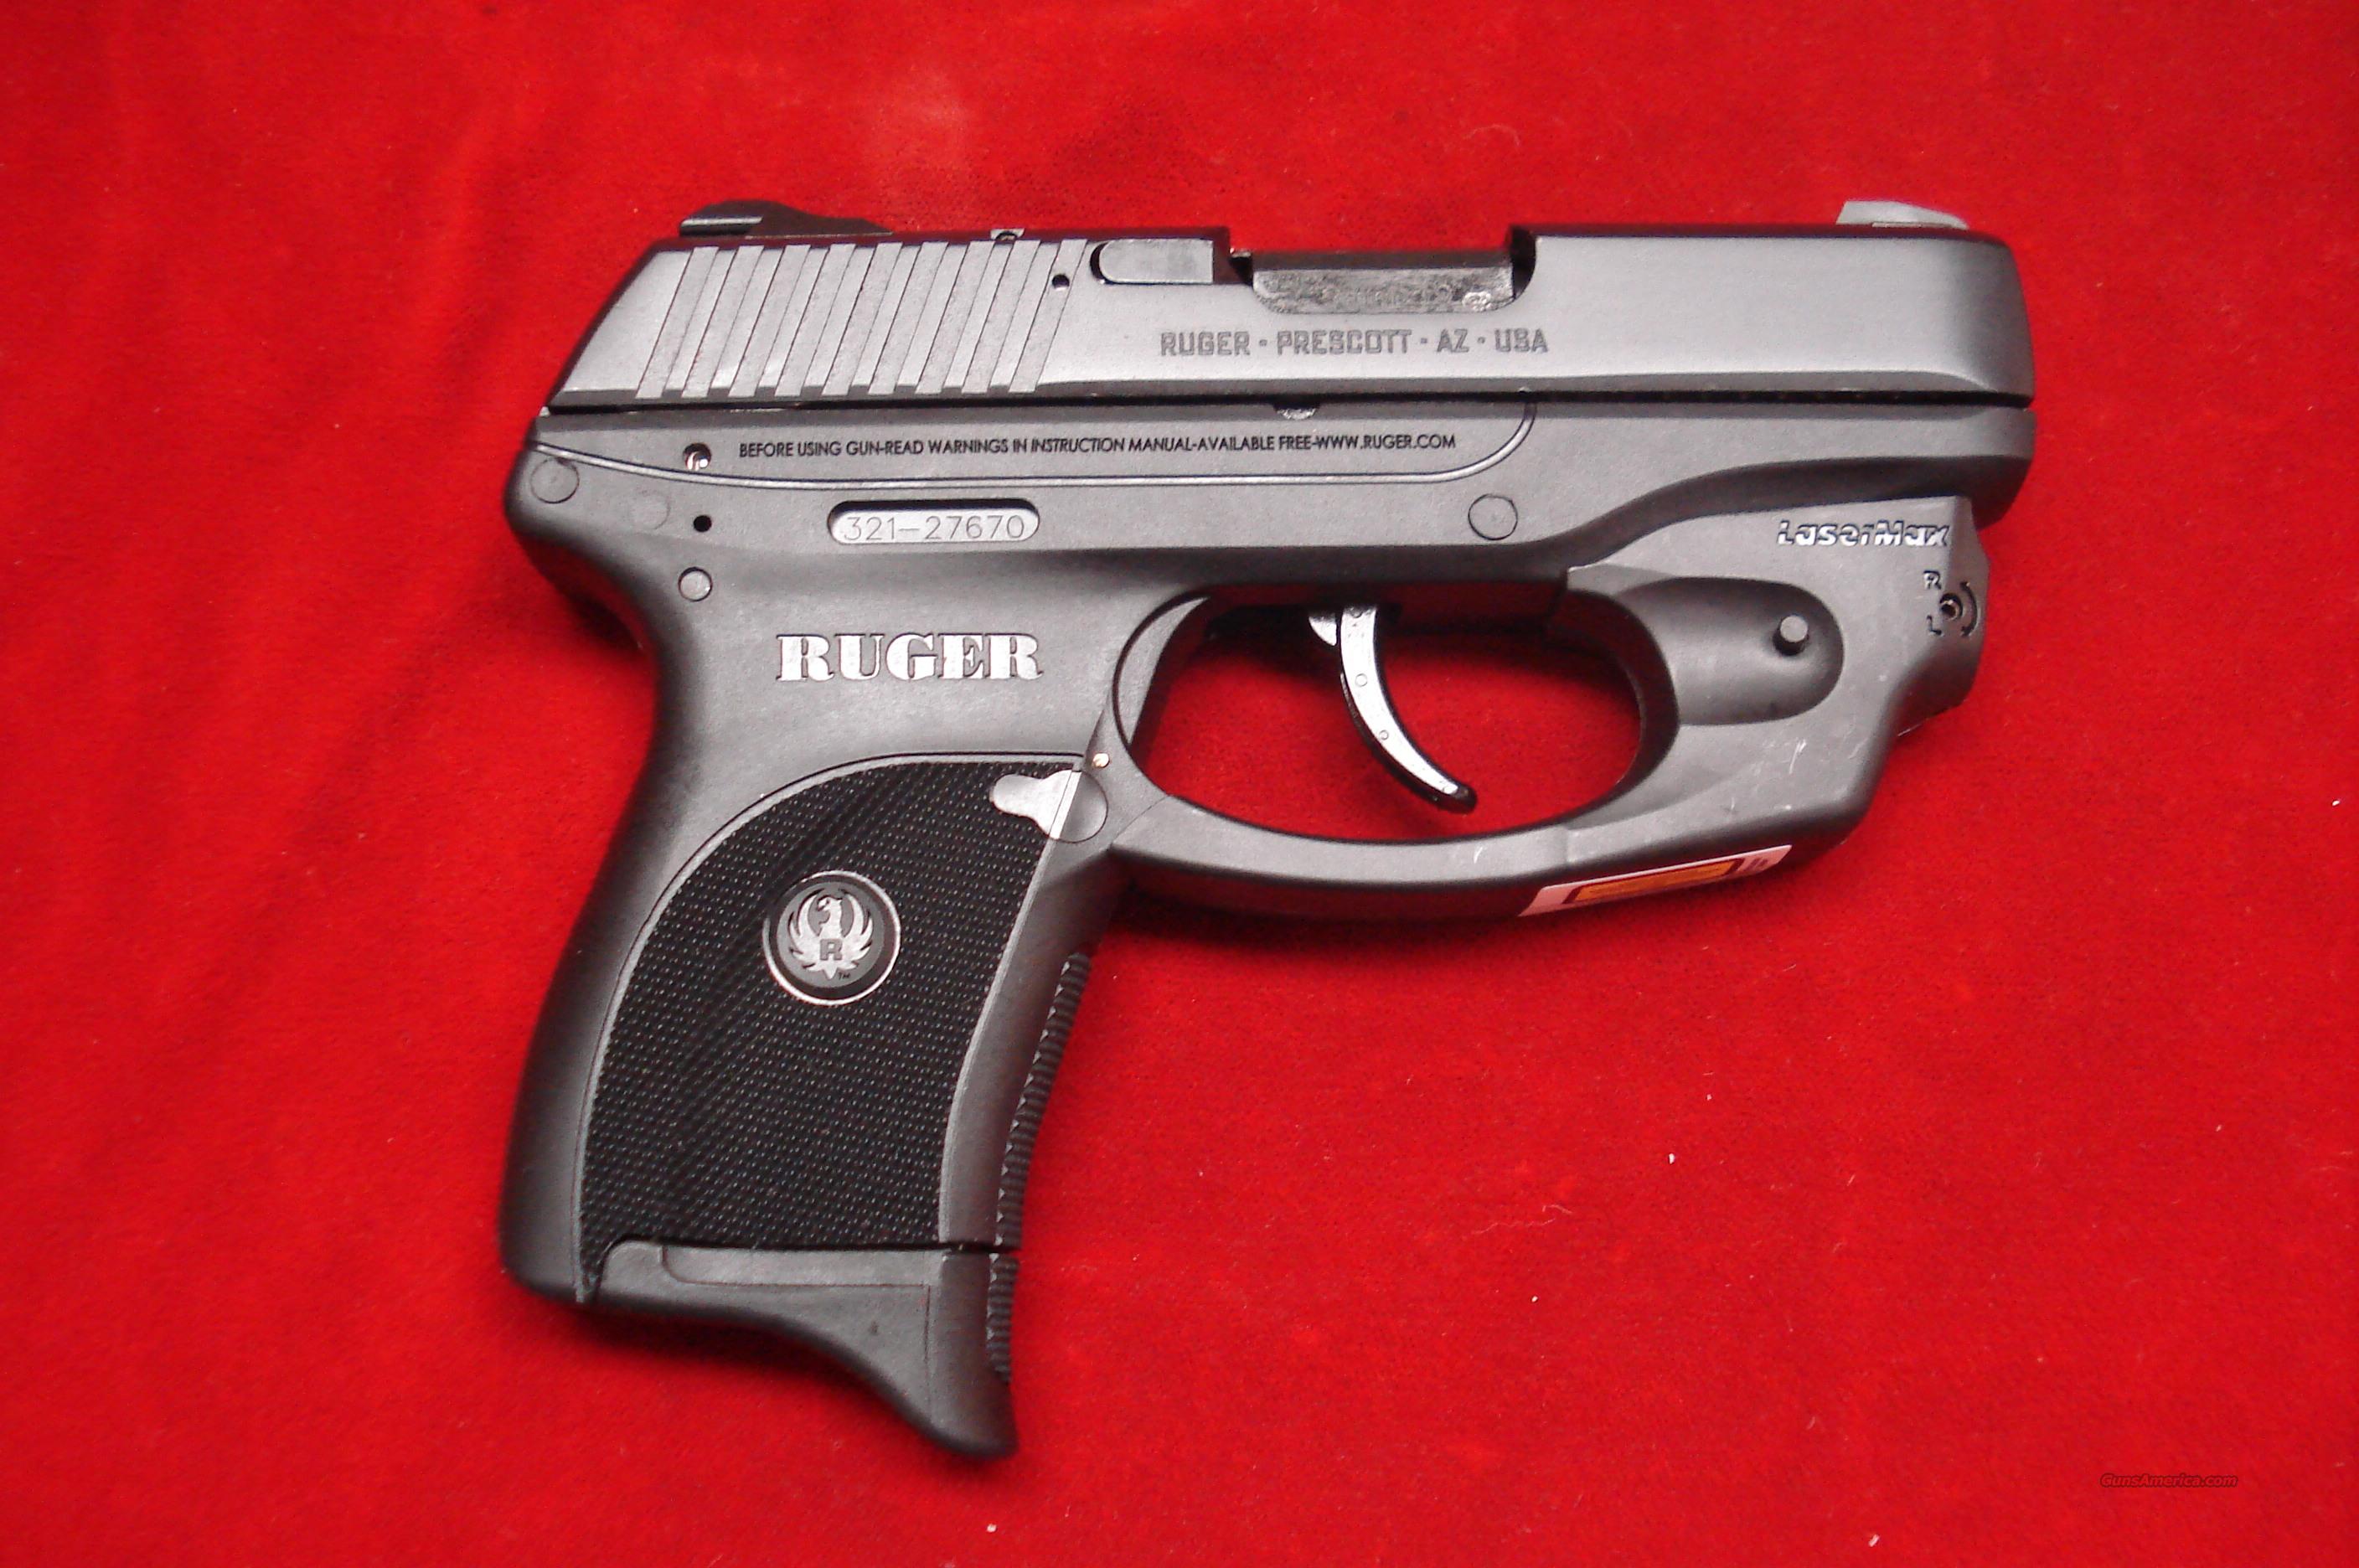 Ruger Lc9 Lightweight Compact Nine For Sale At 975028094 9237